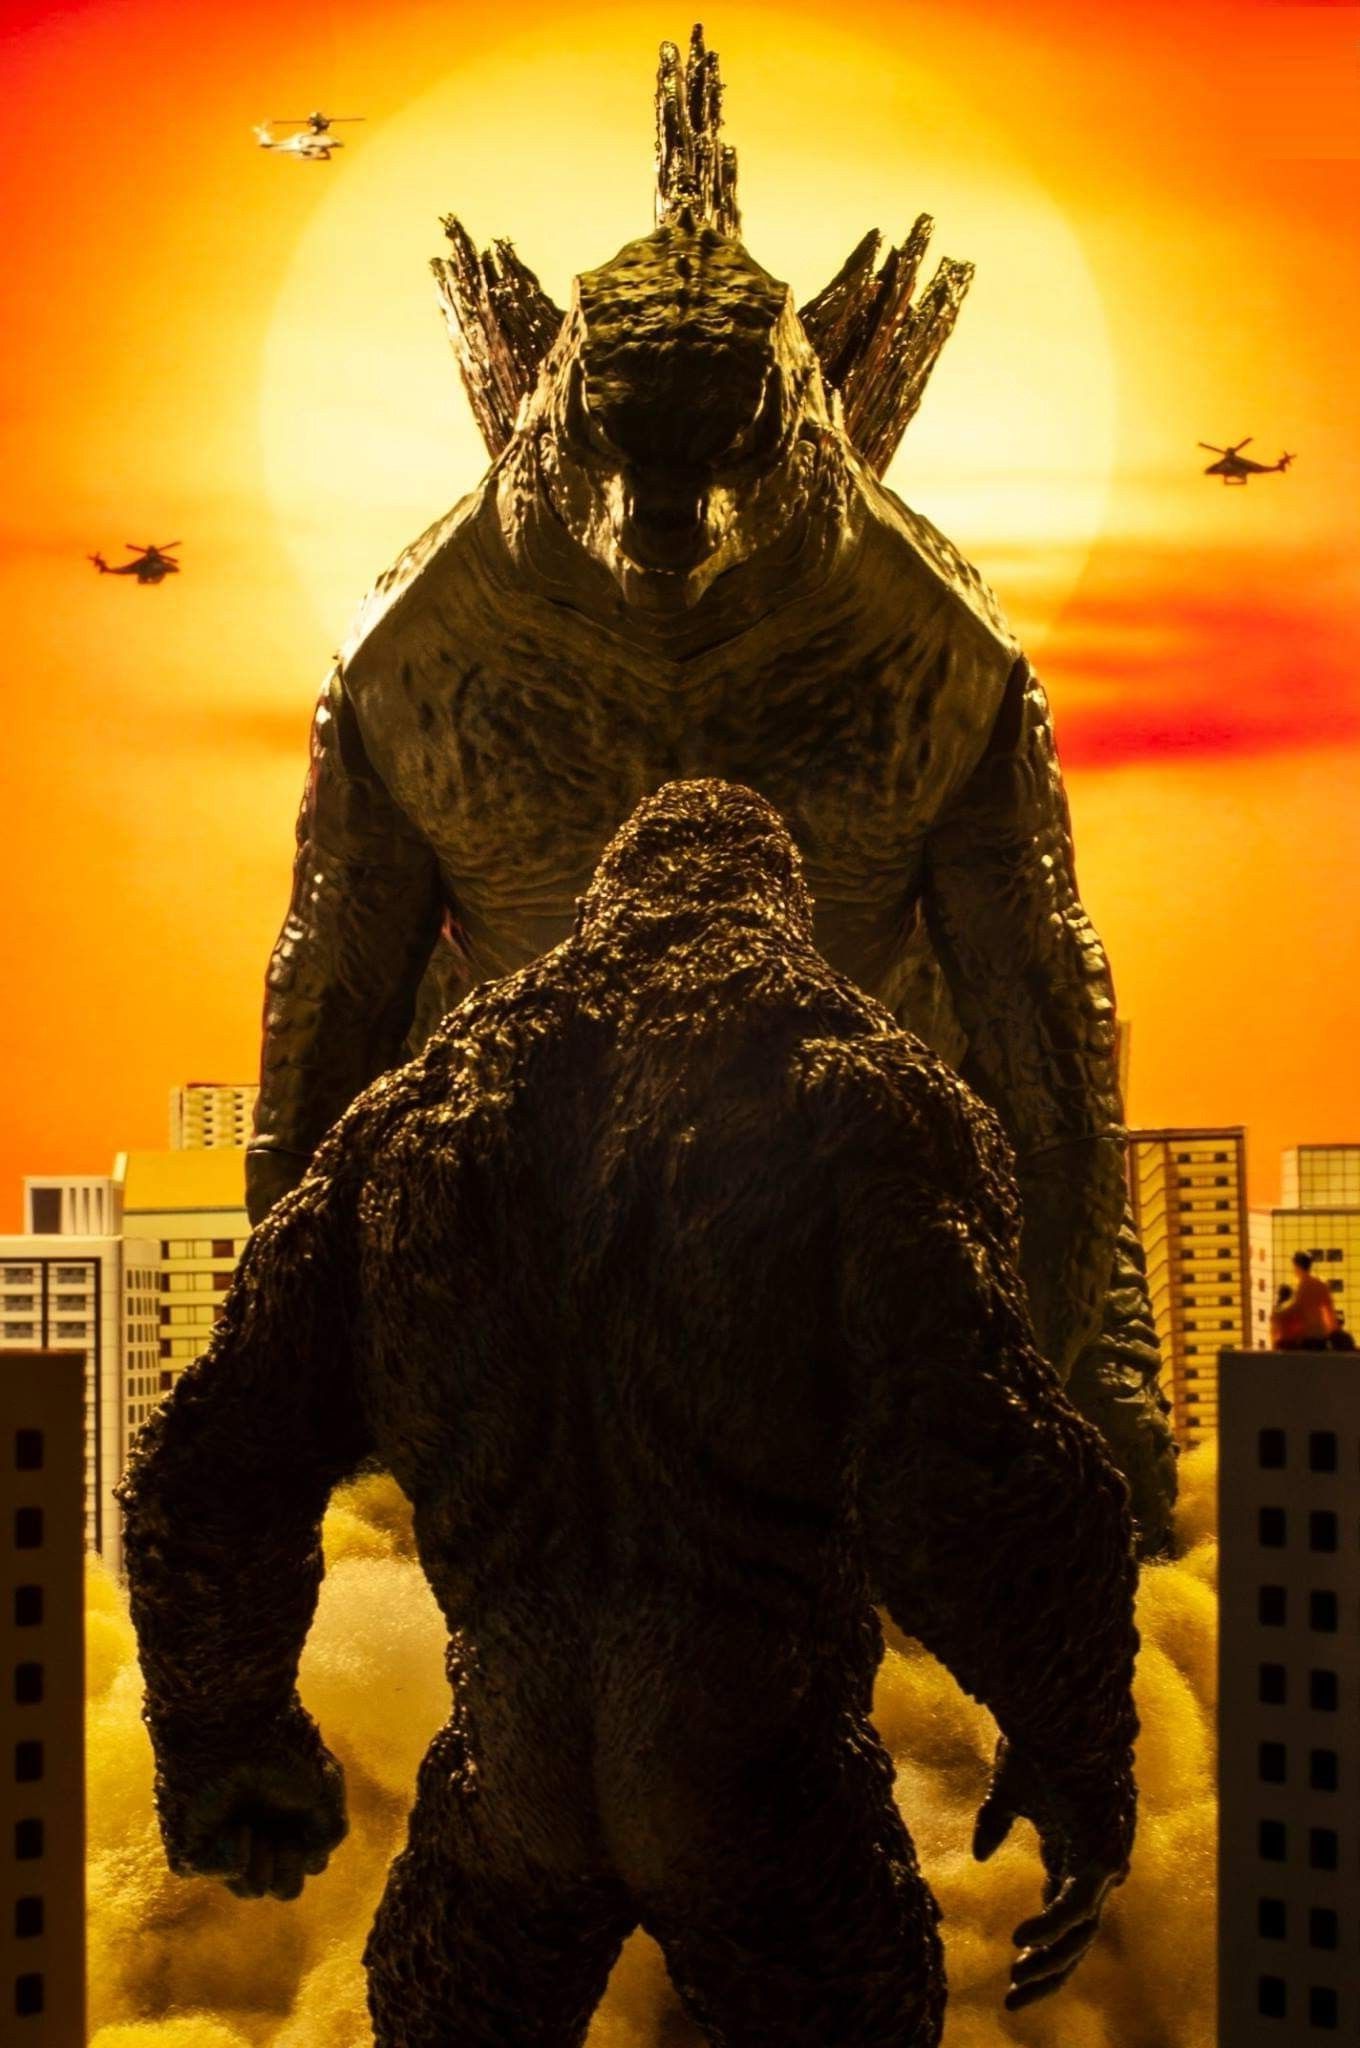 Godzilla vs Kong Wallpaper for mobile phone, tablet, desktop computer and other devices HD and 4K wall. King kong vs godzilla, Godzilla comics, Godzilla wallpaper